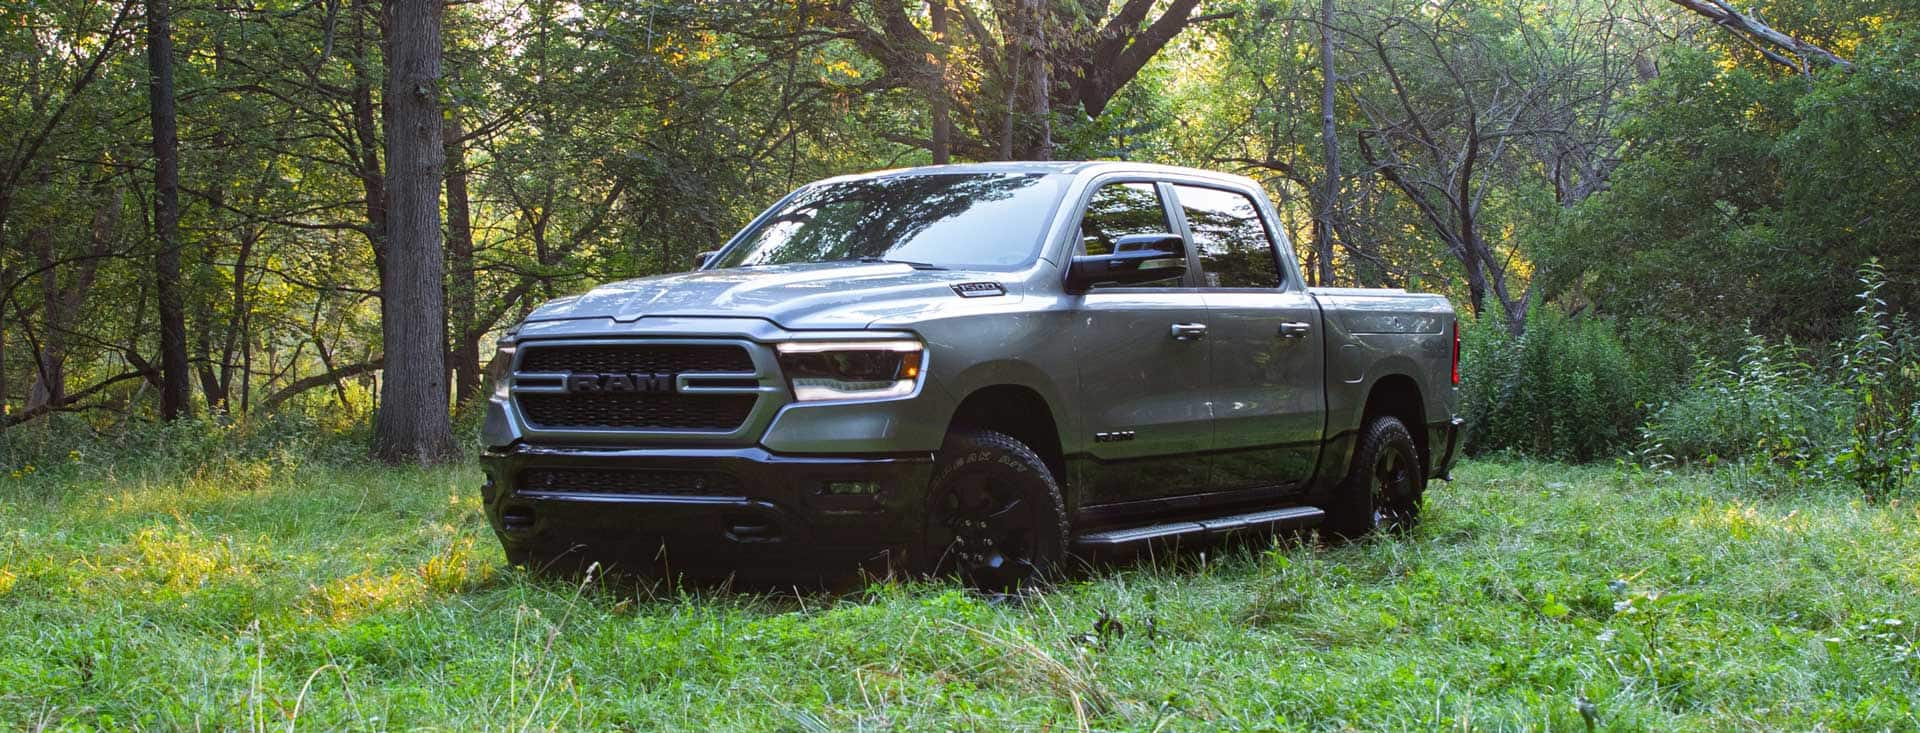 The 2022 Ram 1500 Big Horn BackCountry parked in a grassy meadow.